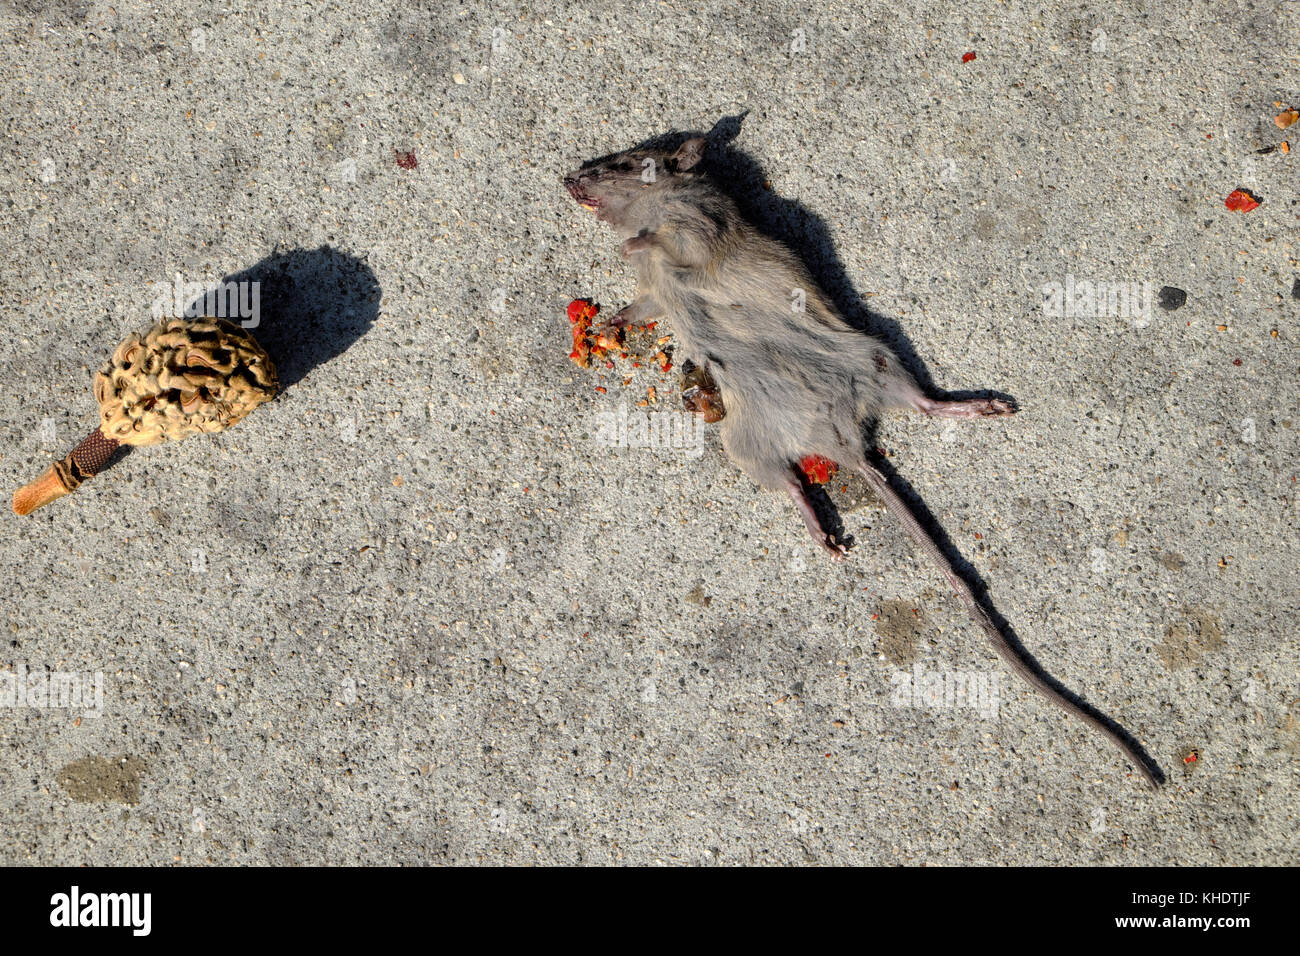 Dead mouse dead on sidewalk presumably from ingesting red seeds from pod which lies next to rodent on Beverly Boulevard Los Angeles USA  KATHY DEWITT Stock Photo